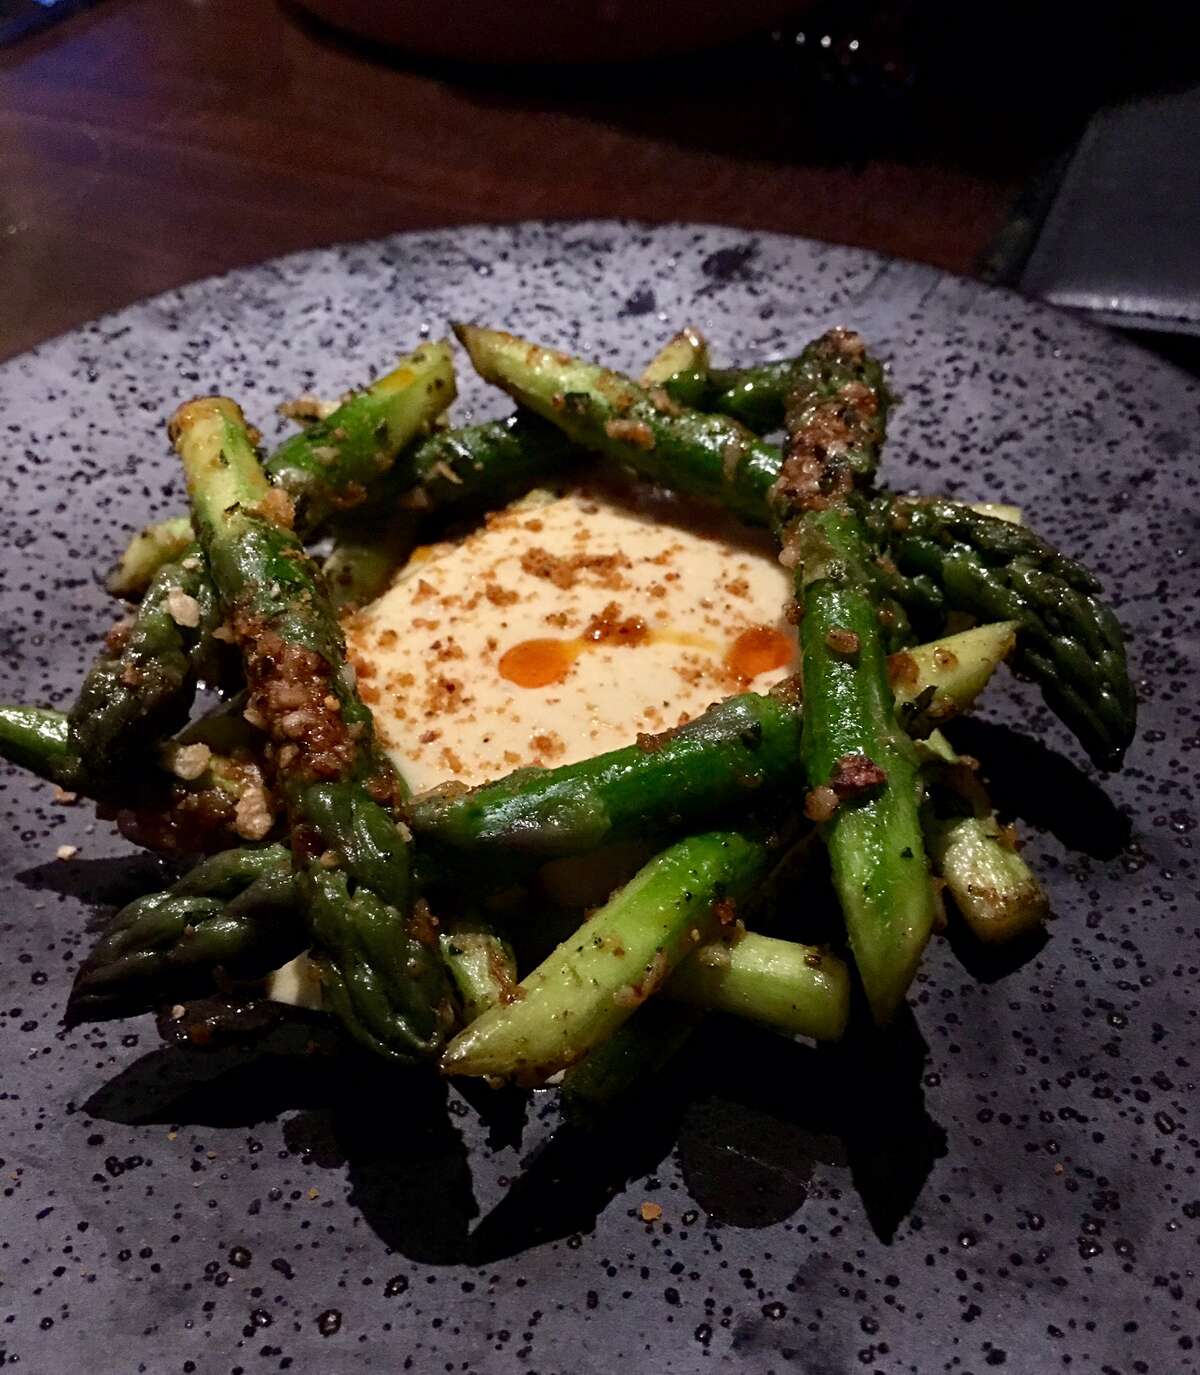 Rooh: Grilled asparagus surrounding a spiced cauliflower mousse